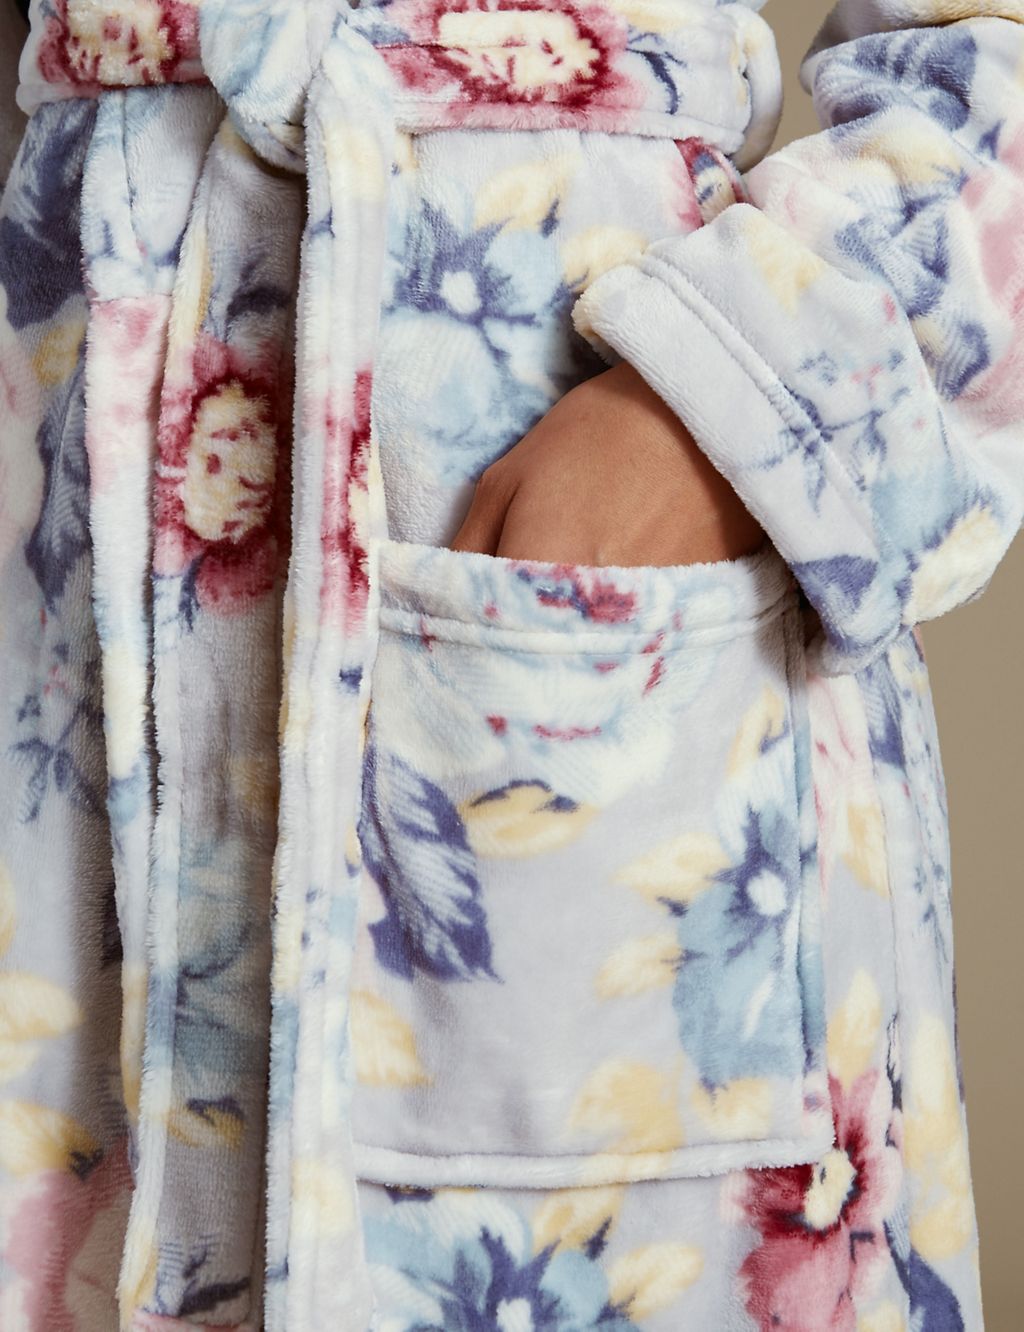 Floral Print Dressing Gown 6 of 7